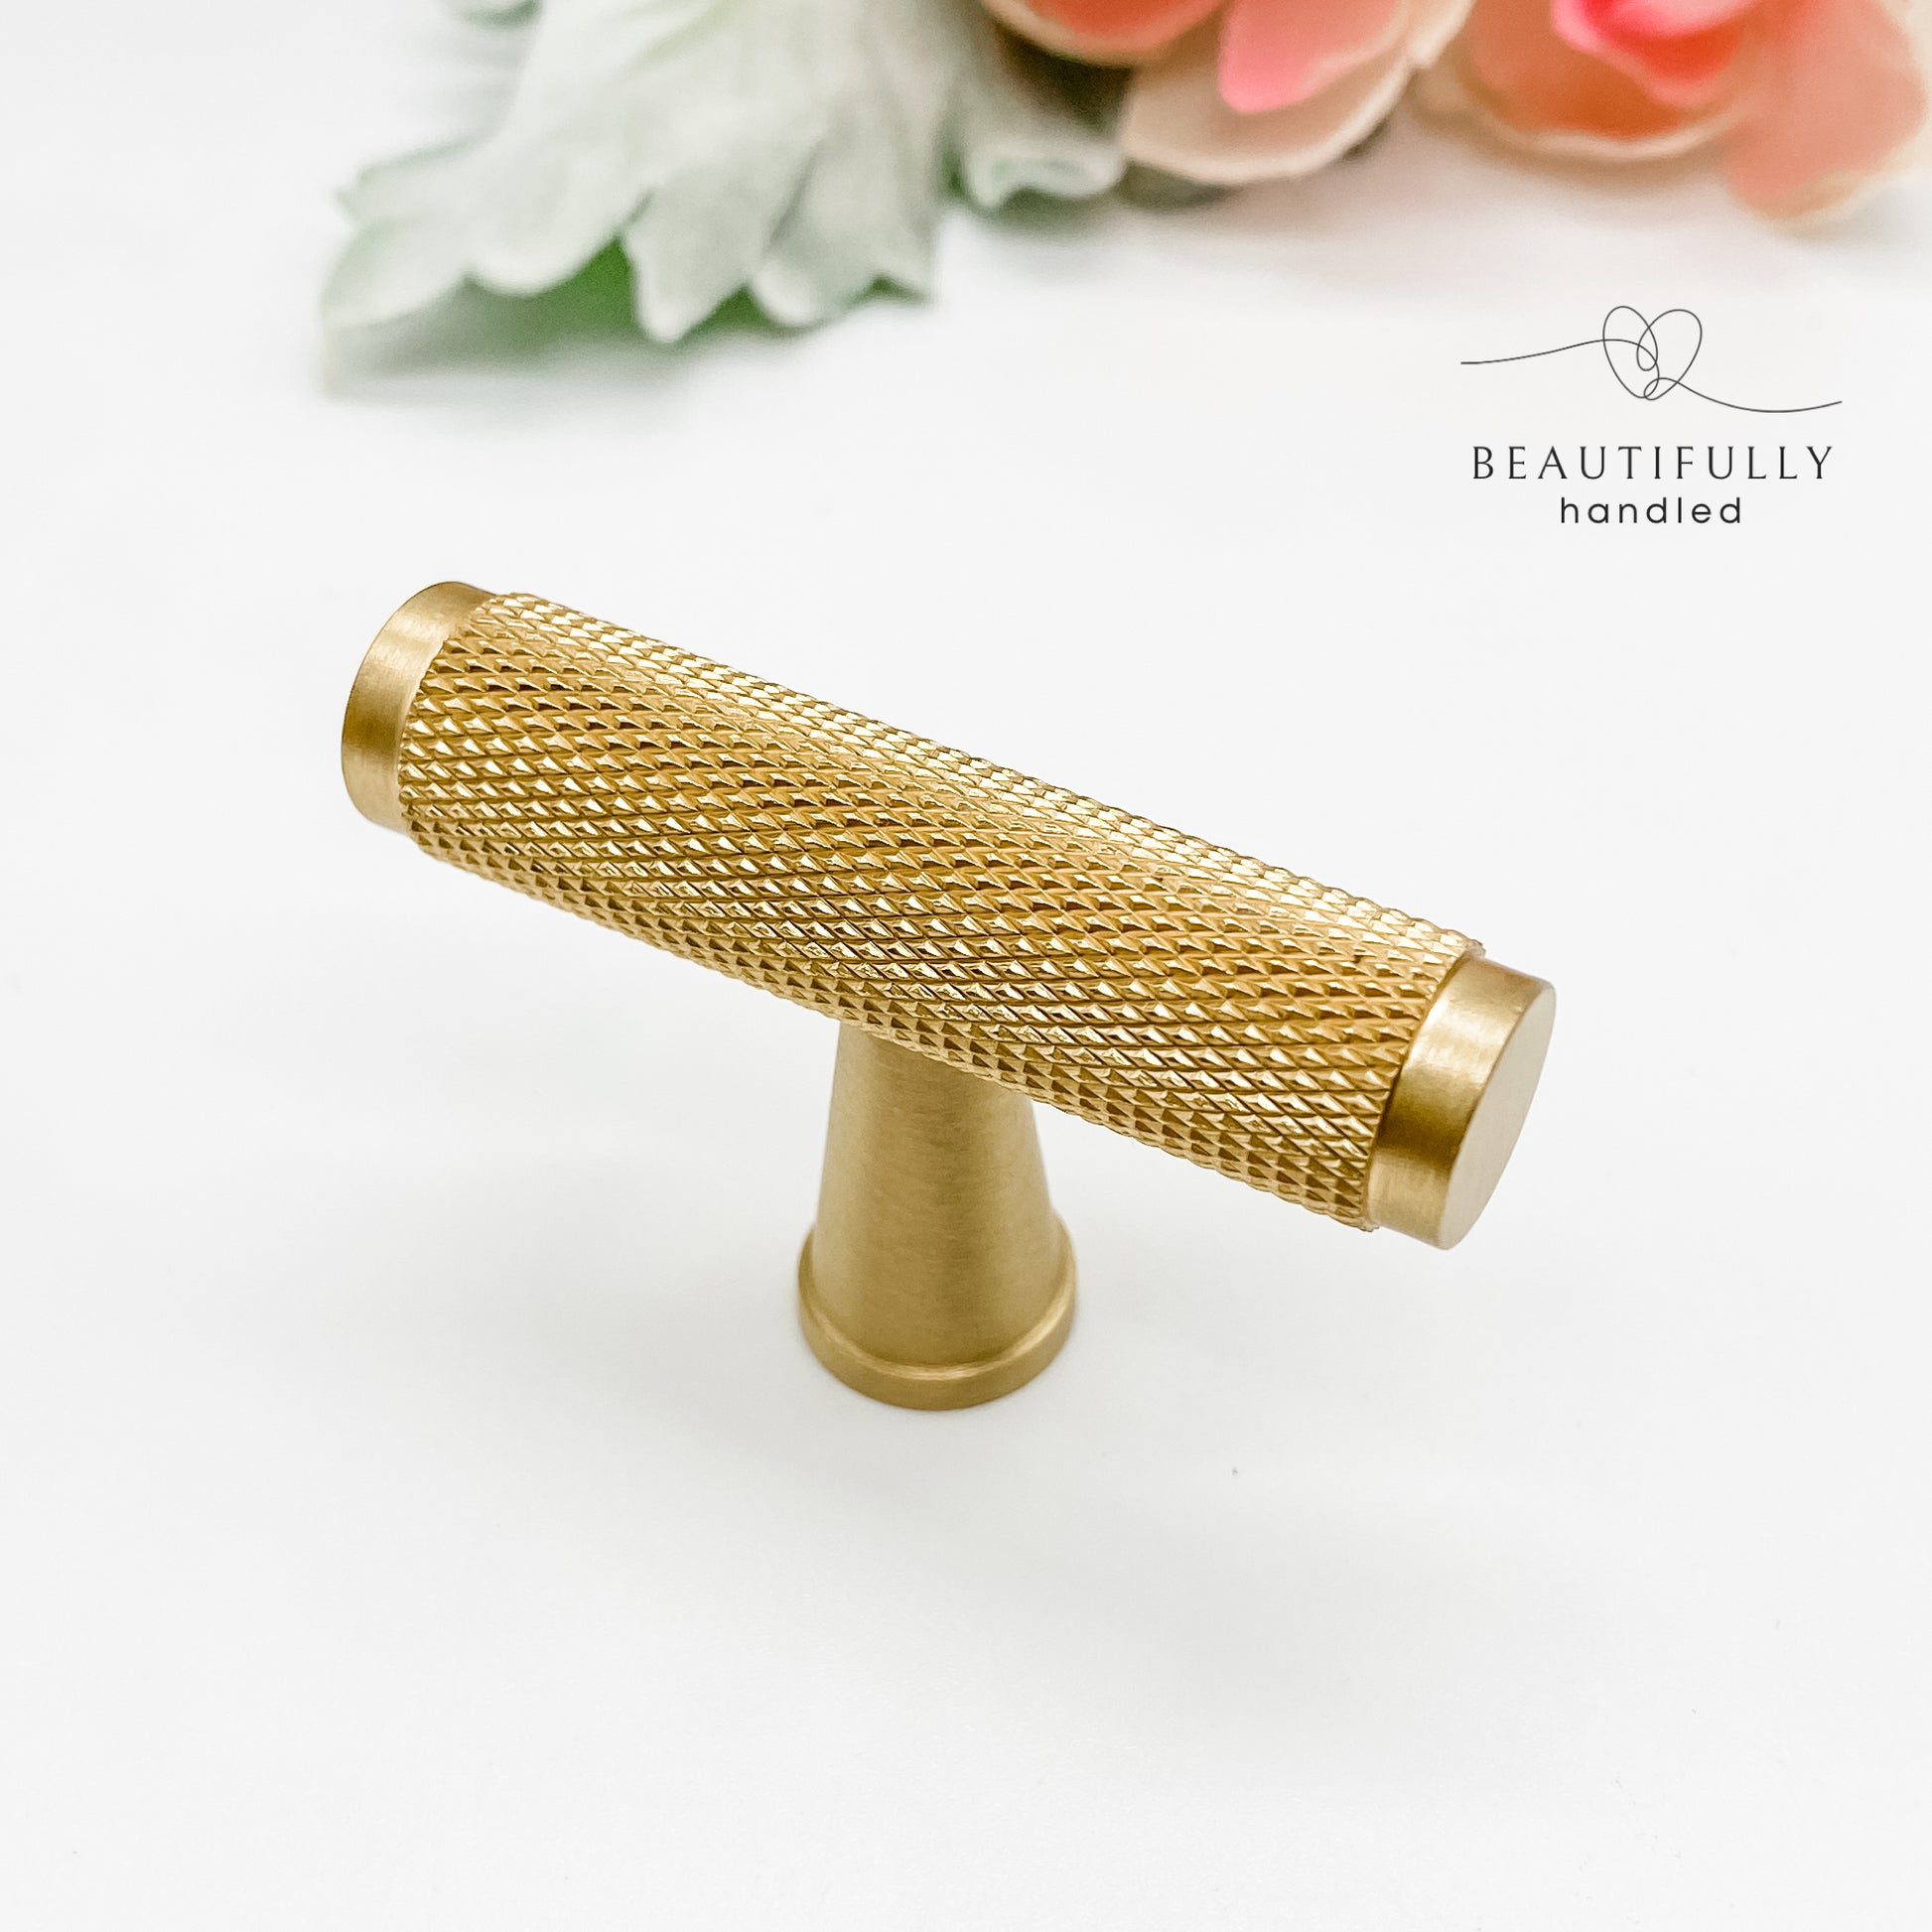 solid knurled brass t bar drawer handle on plain white background